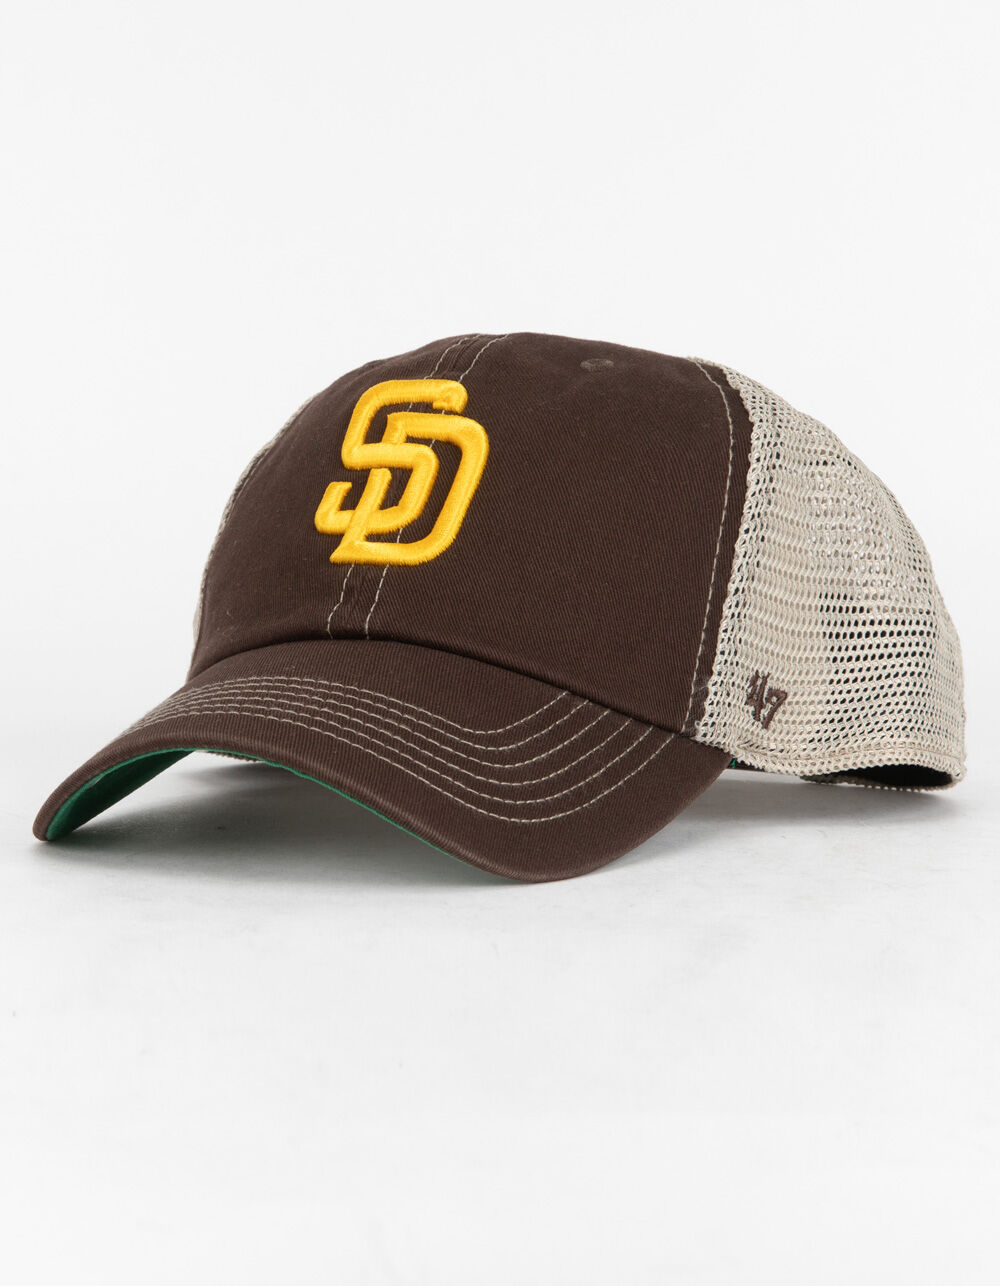  47 San Diego Padres Clean Up Adjustable Hat, for Adult